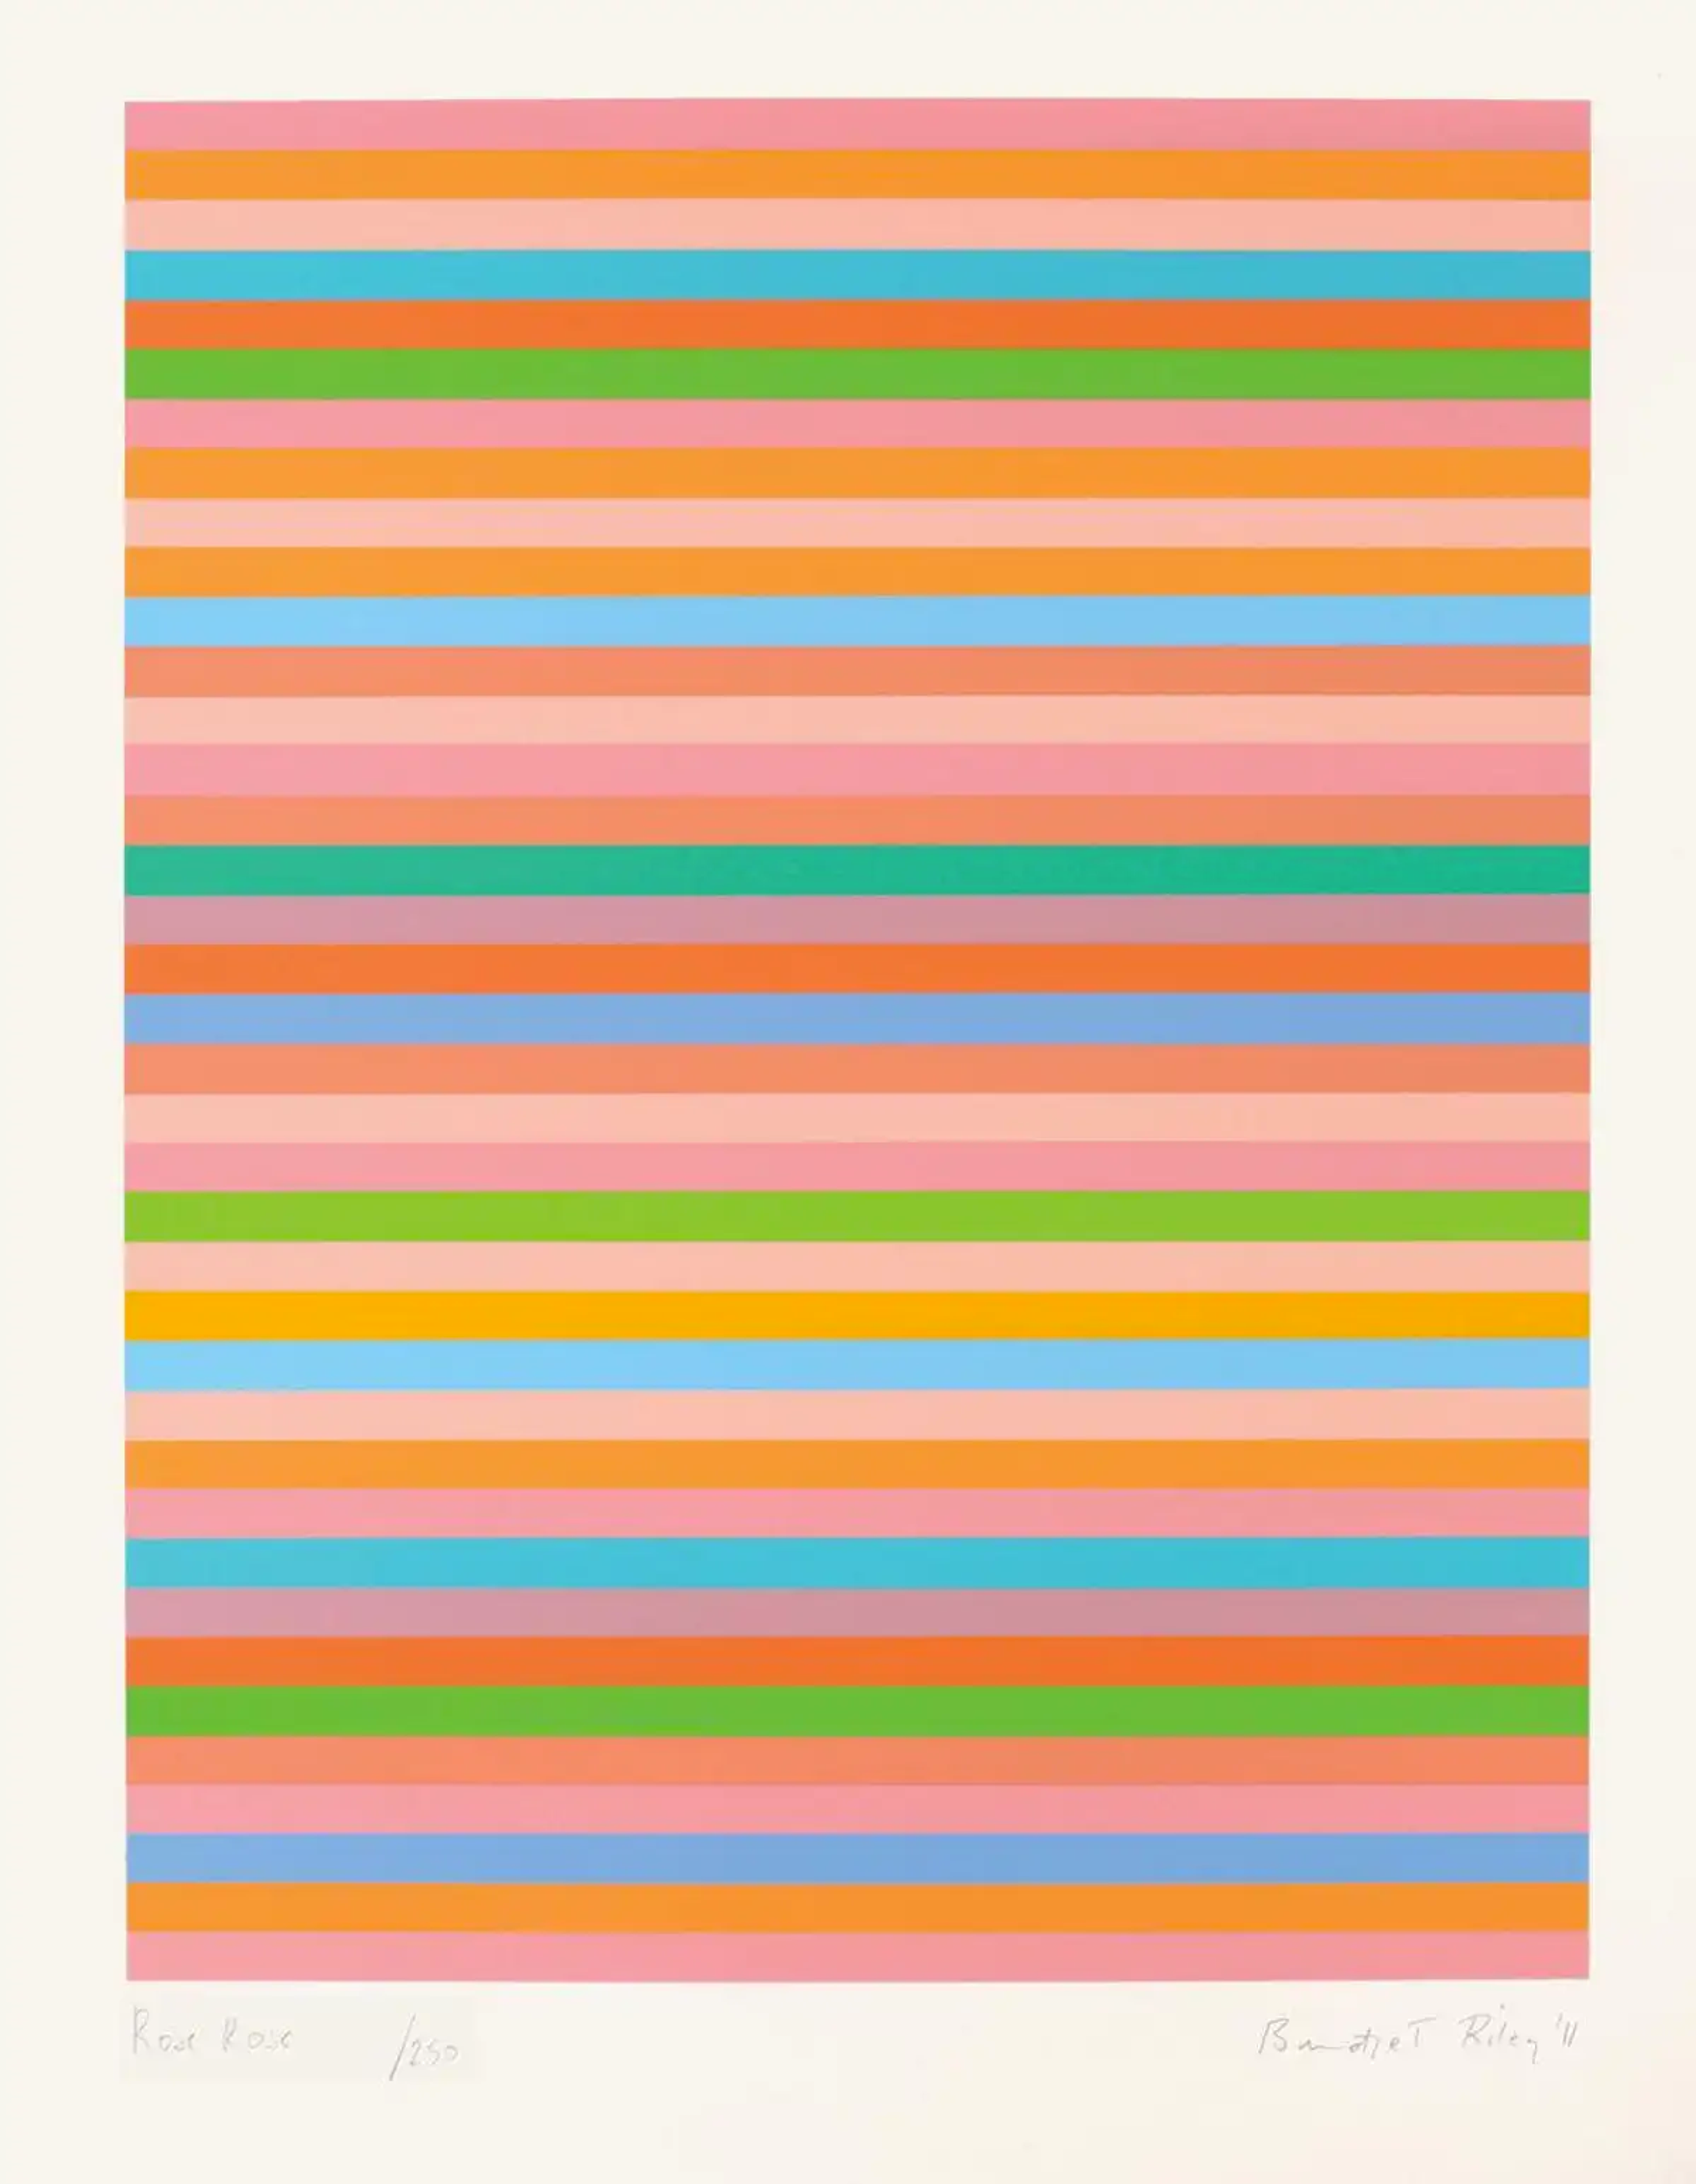 In this print by Riley, horizontal stripes are seen. Consisting of 12 bands in varying pinks, purples, reds and greens, a light blue shade provides pause and contrast.